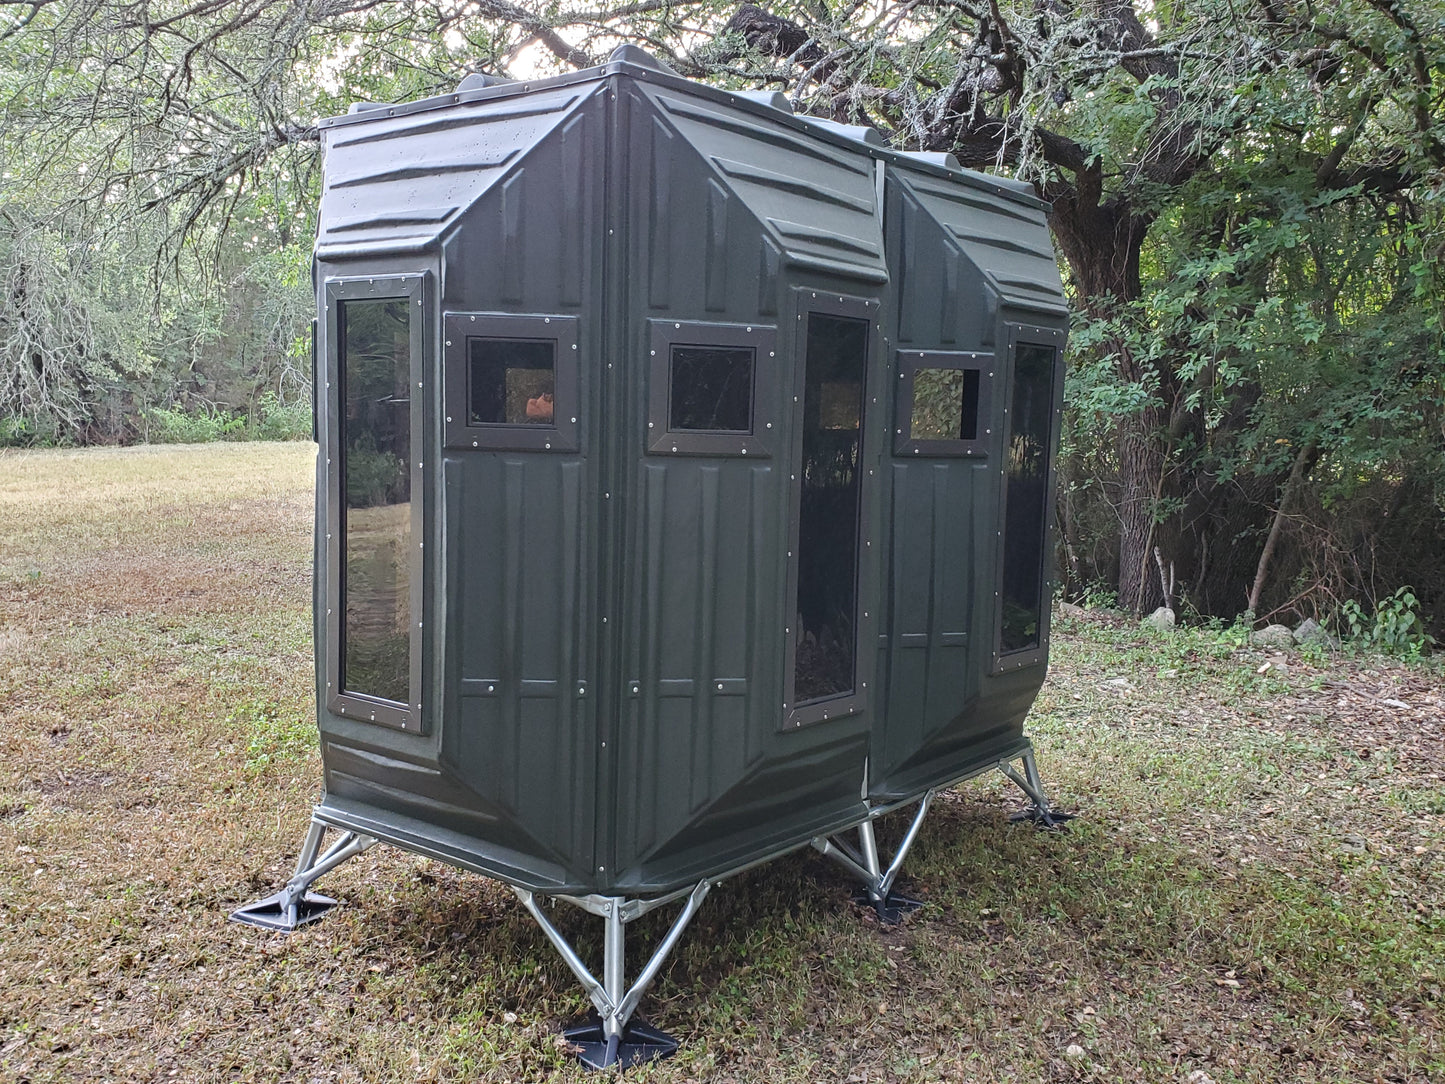 'The Bynd' 4'x8' Bow Hunting Blind - Olive Drab Green with Full Door